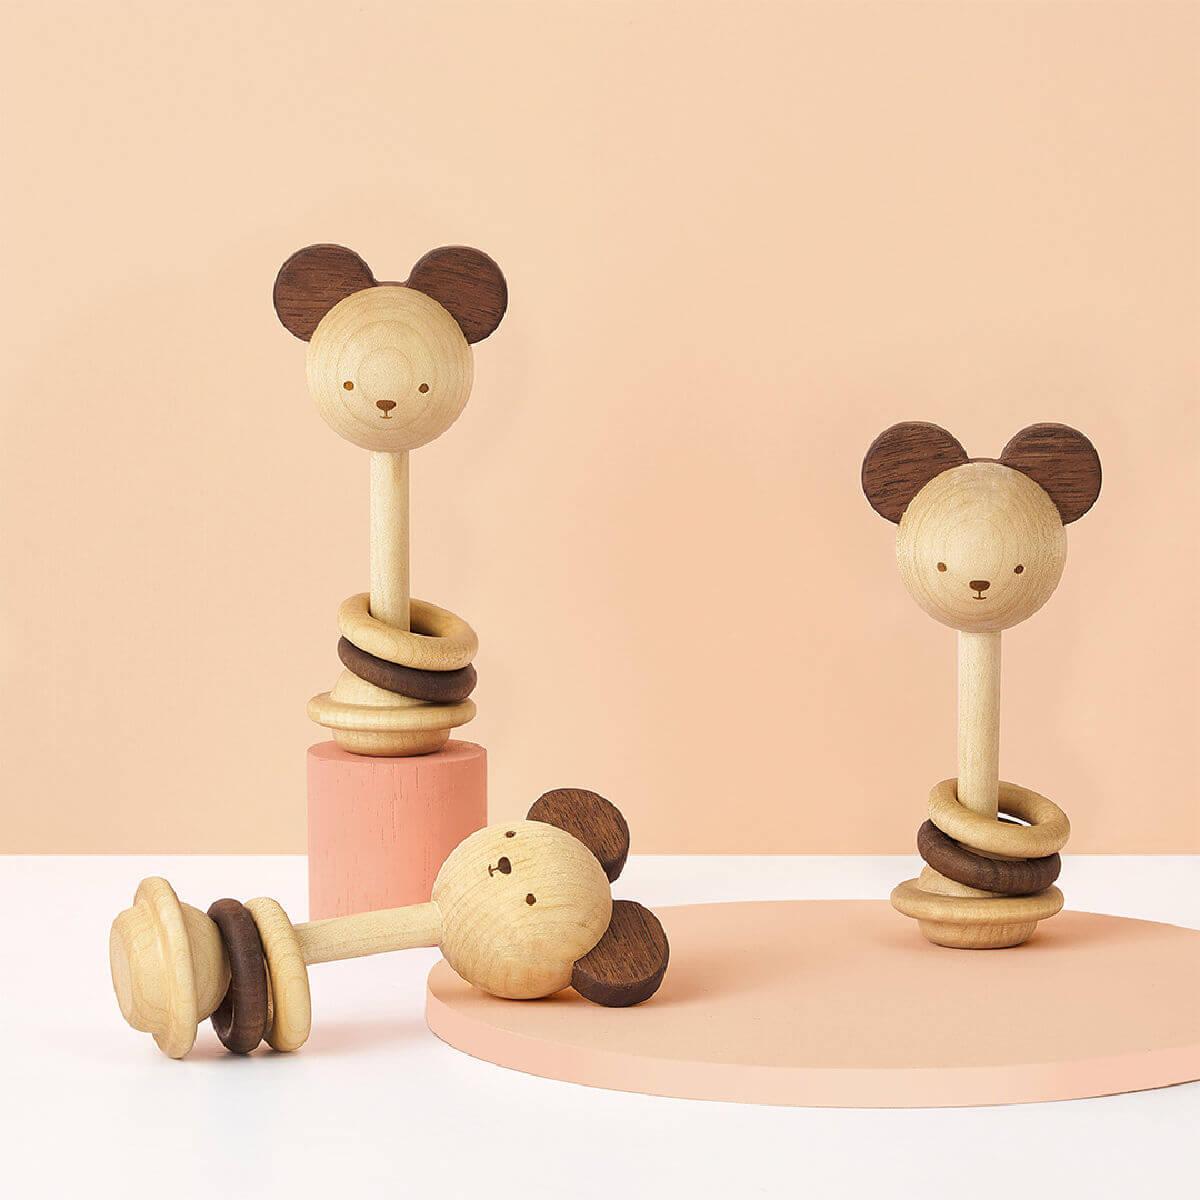 oioiooi nice to michu rattle a wooden baby rattle in a bear design at blue brontide uk